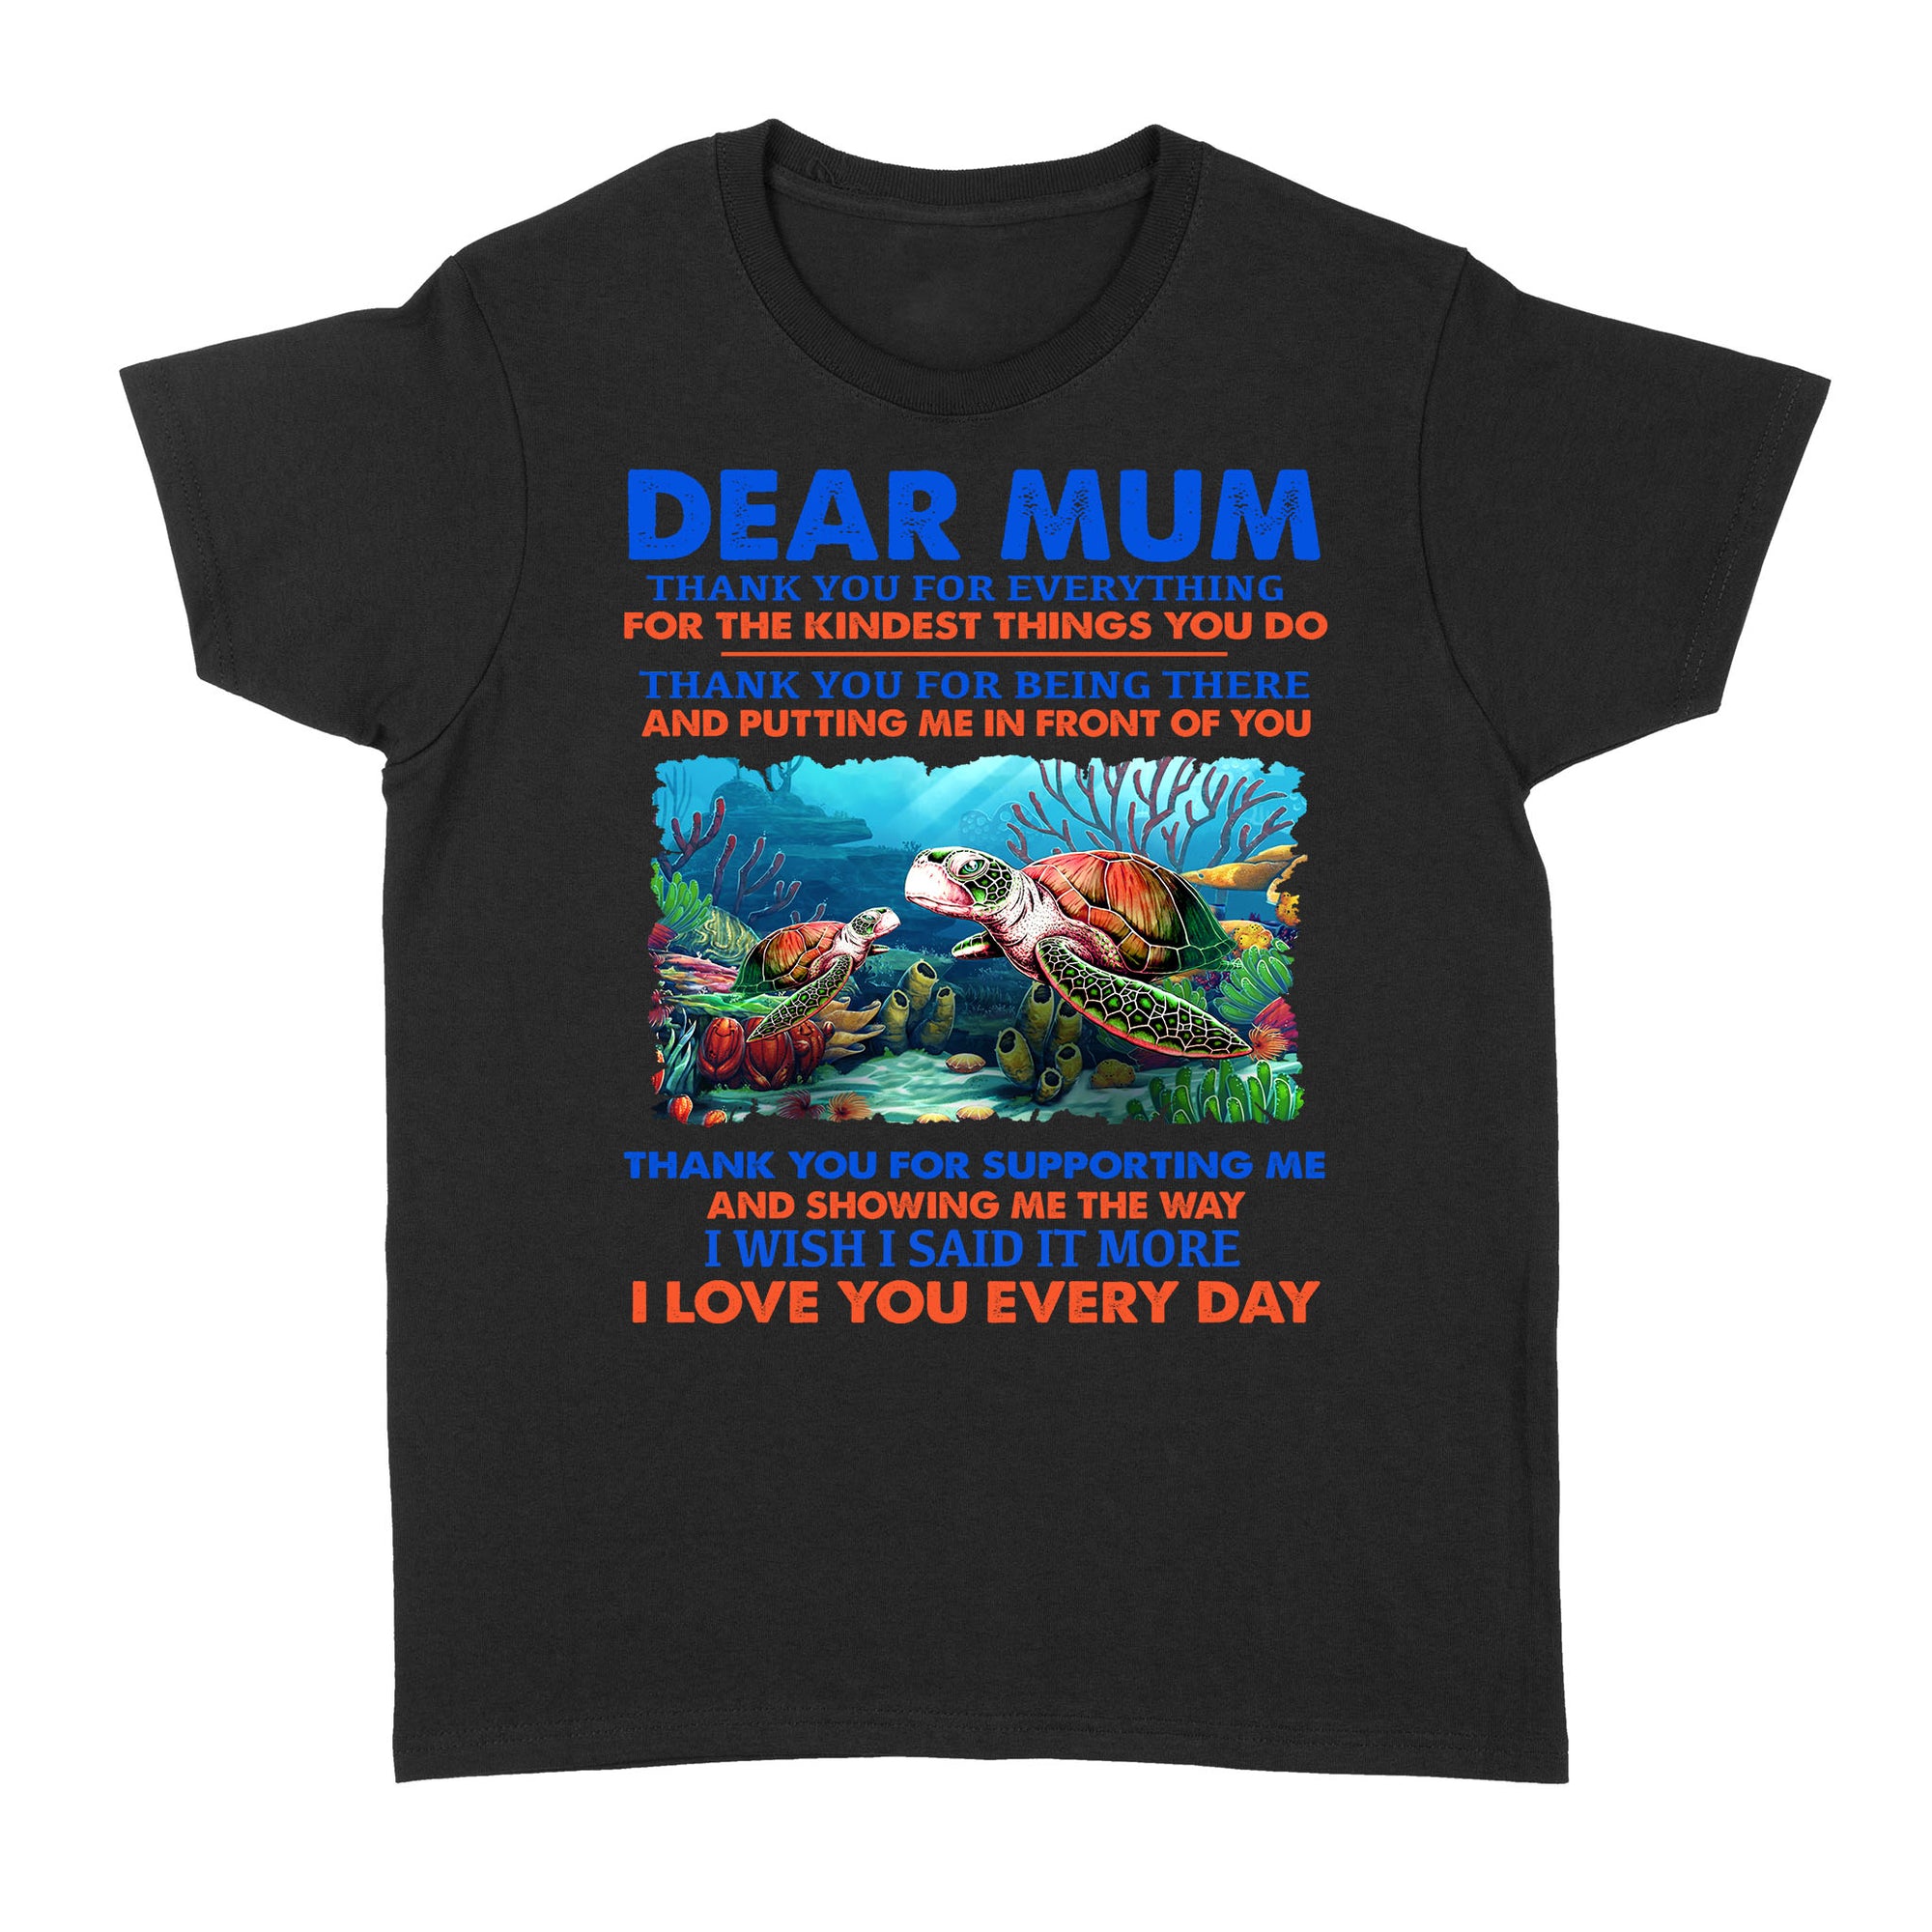 Dear Mum Thank You For Everything, For The Kindest Things You Do, Turtle - Standard Women's T-shirt